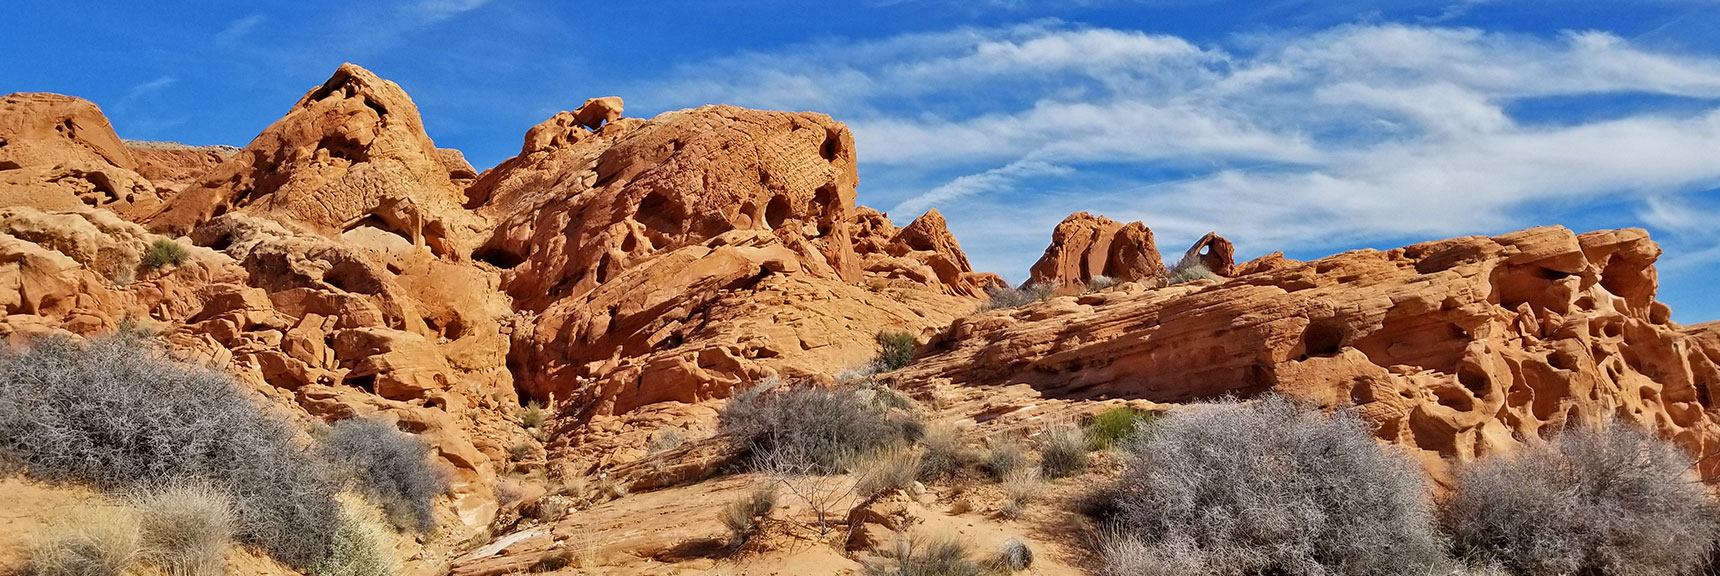 Additional Amazing Rock Formations on Natural Arches Trail, Valley of Fire State Park, Nevada